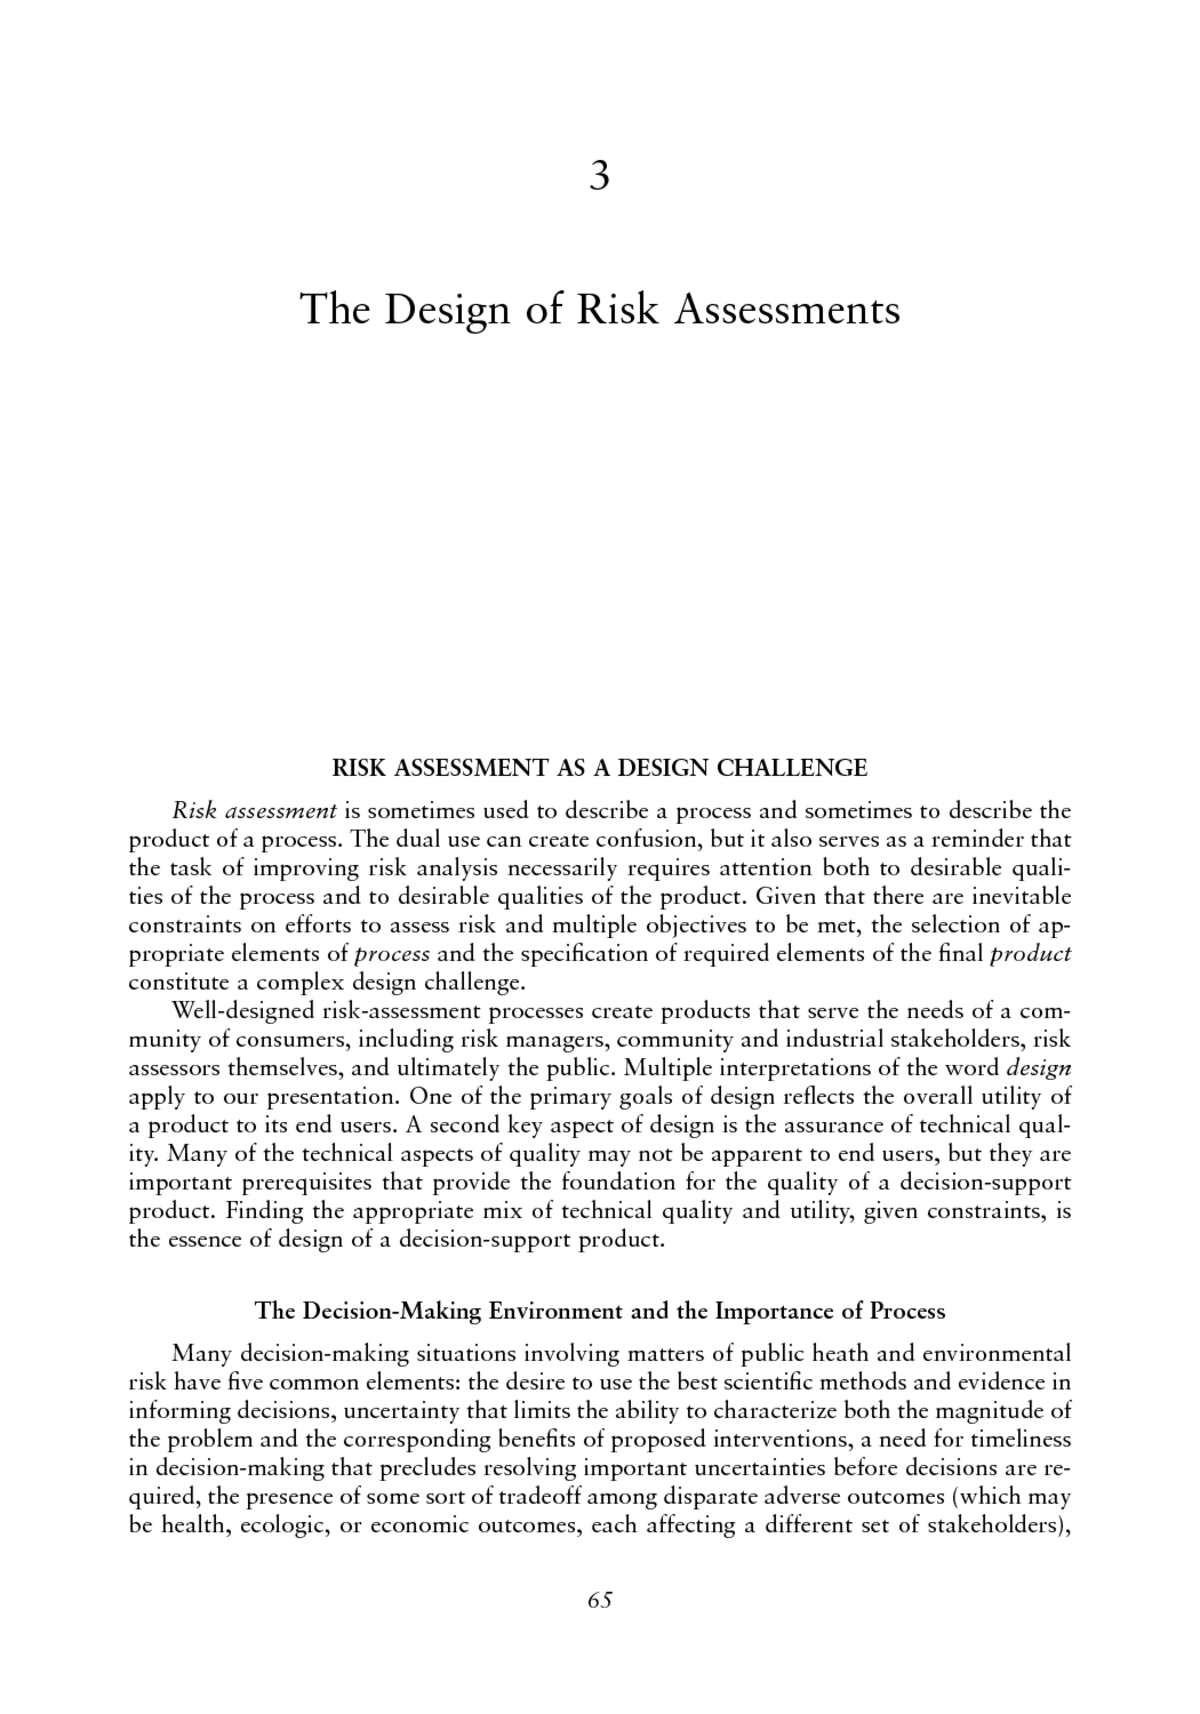 19 The Design of Risk Assessments  Science and Decisions